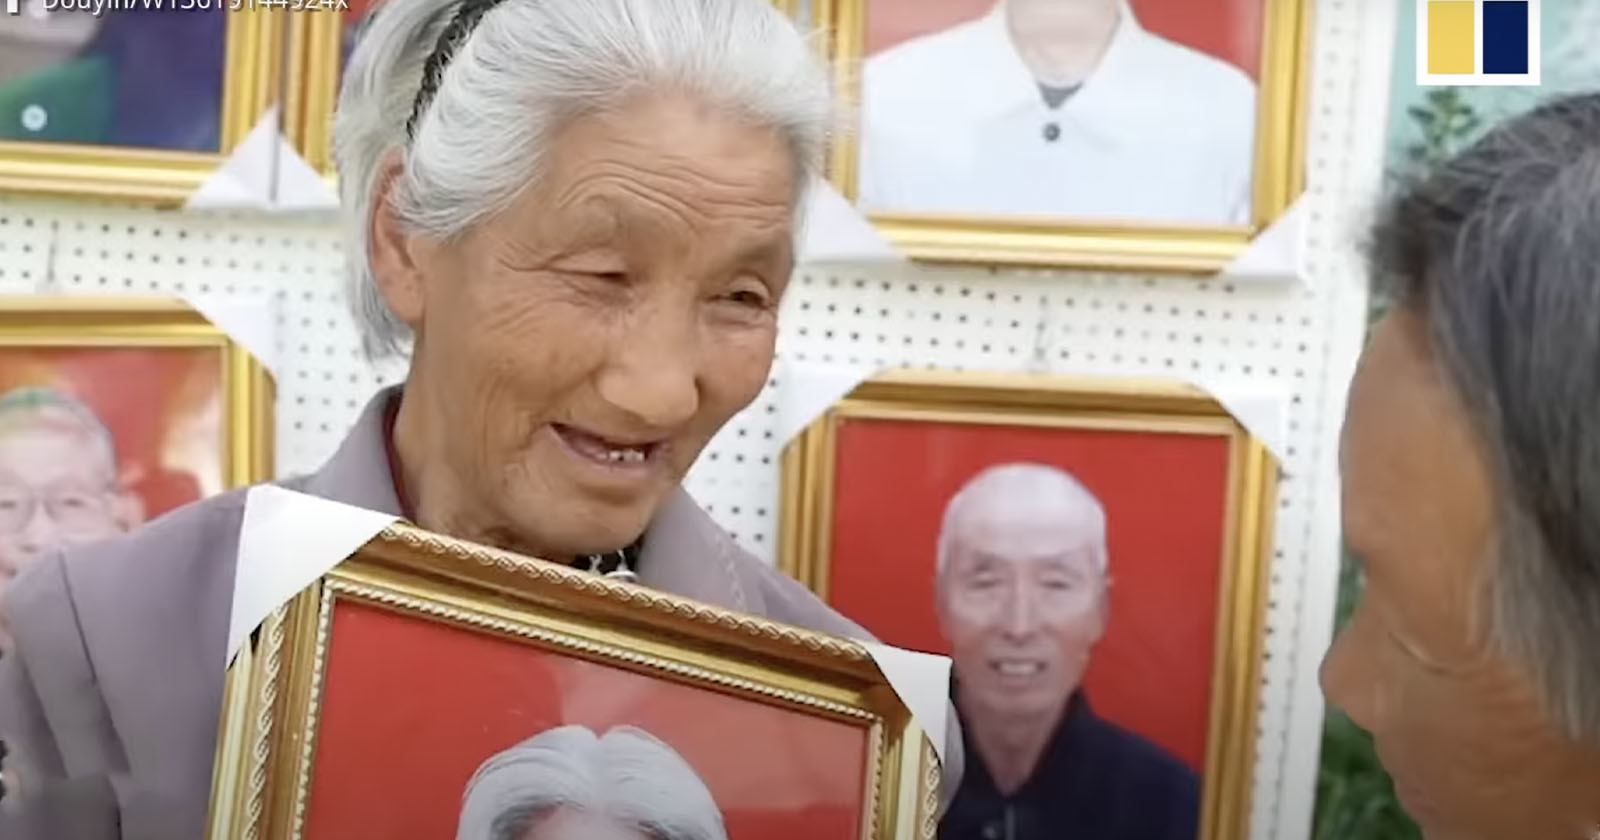 Photographer Gives 3,000 Free Funeral Portraits To Elderly People